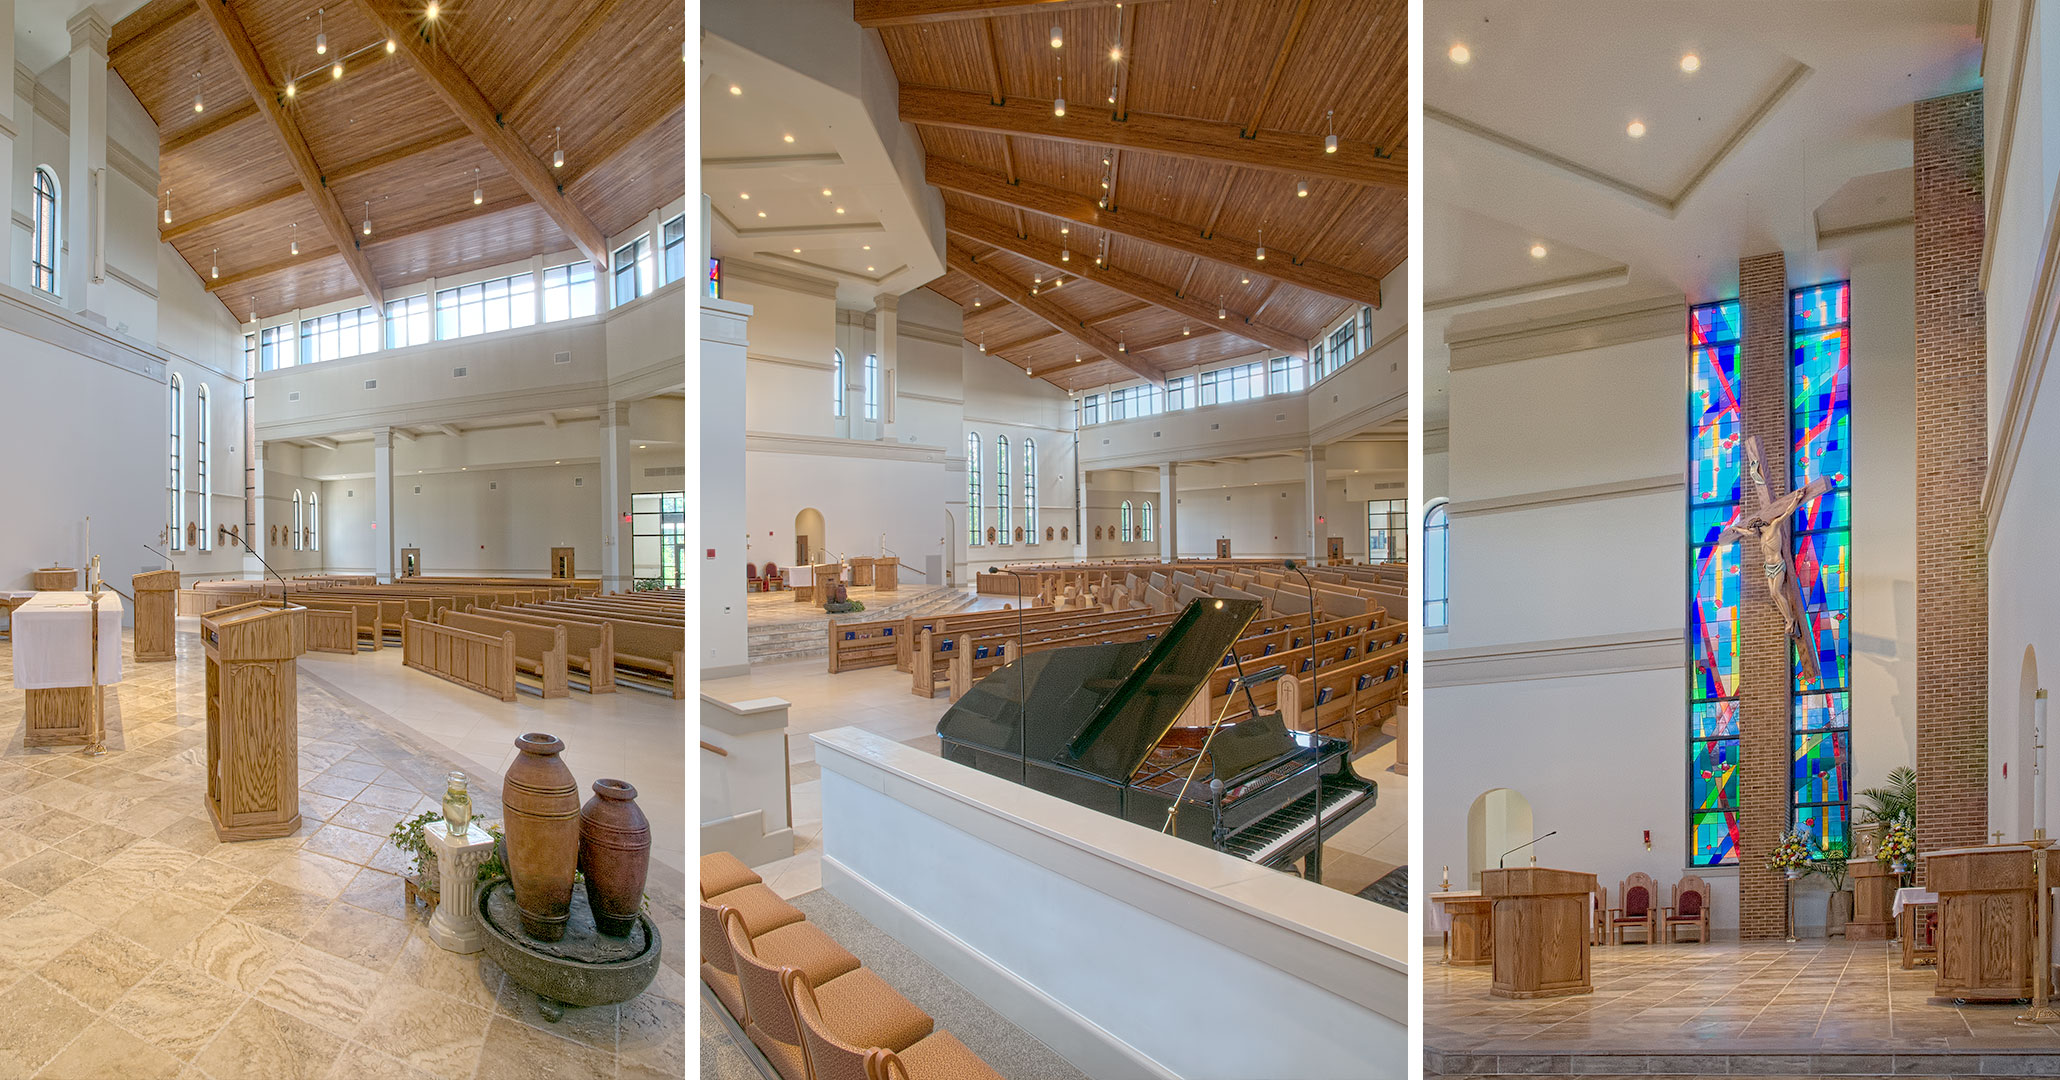 Boudreaux was hired by St. Therese in Mooresville, NC to design the interiors of the sanctuary.